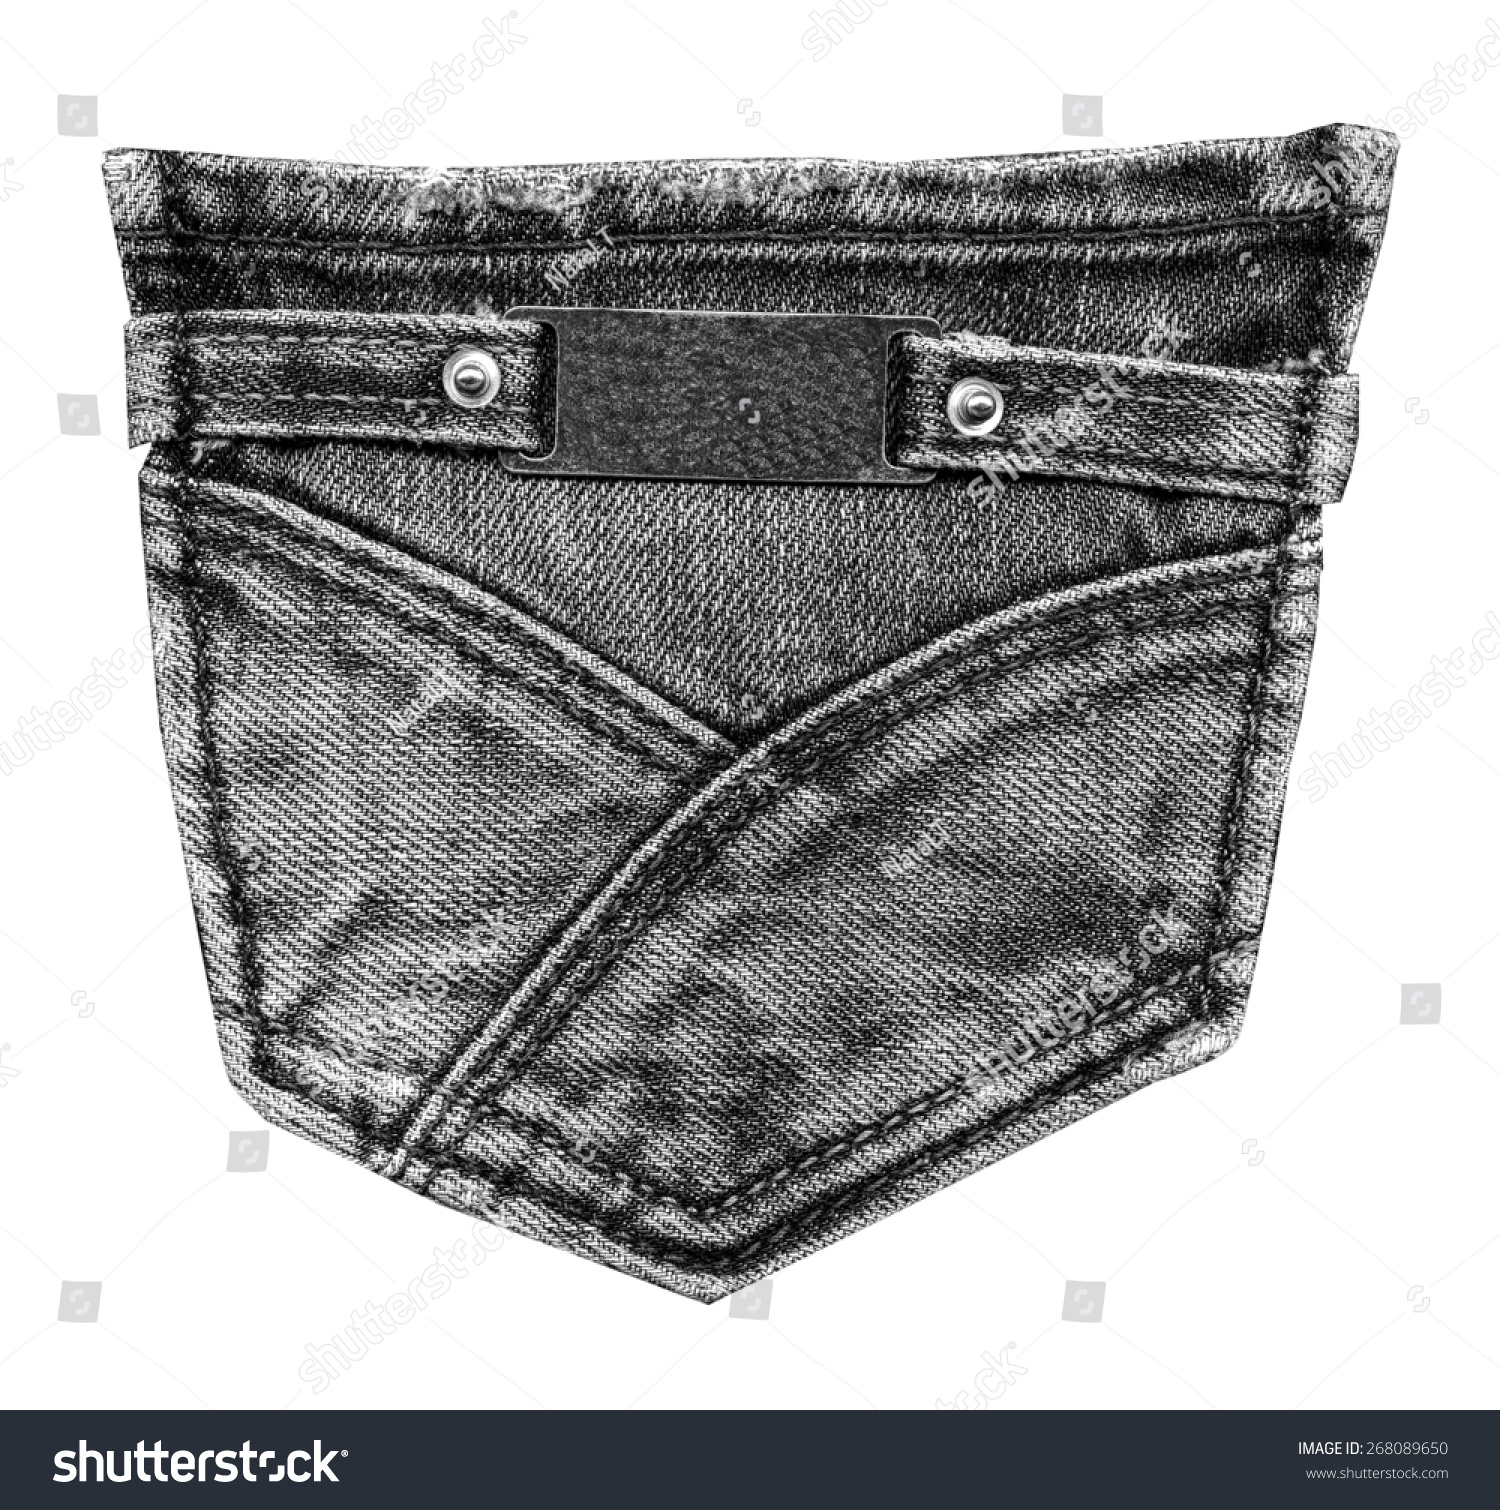 Black Back Jeans Pocket Isolated On Stock Photo 268089650 - Shutterstock